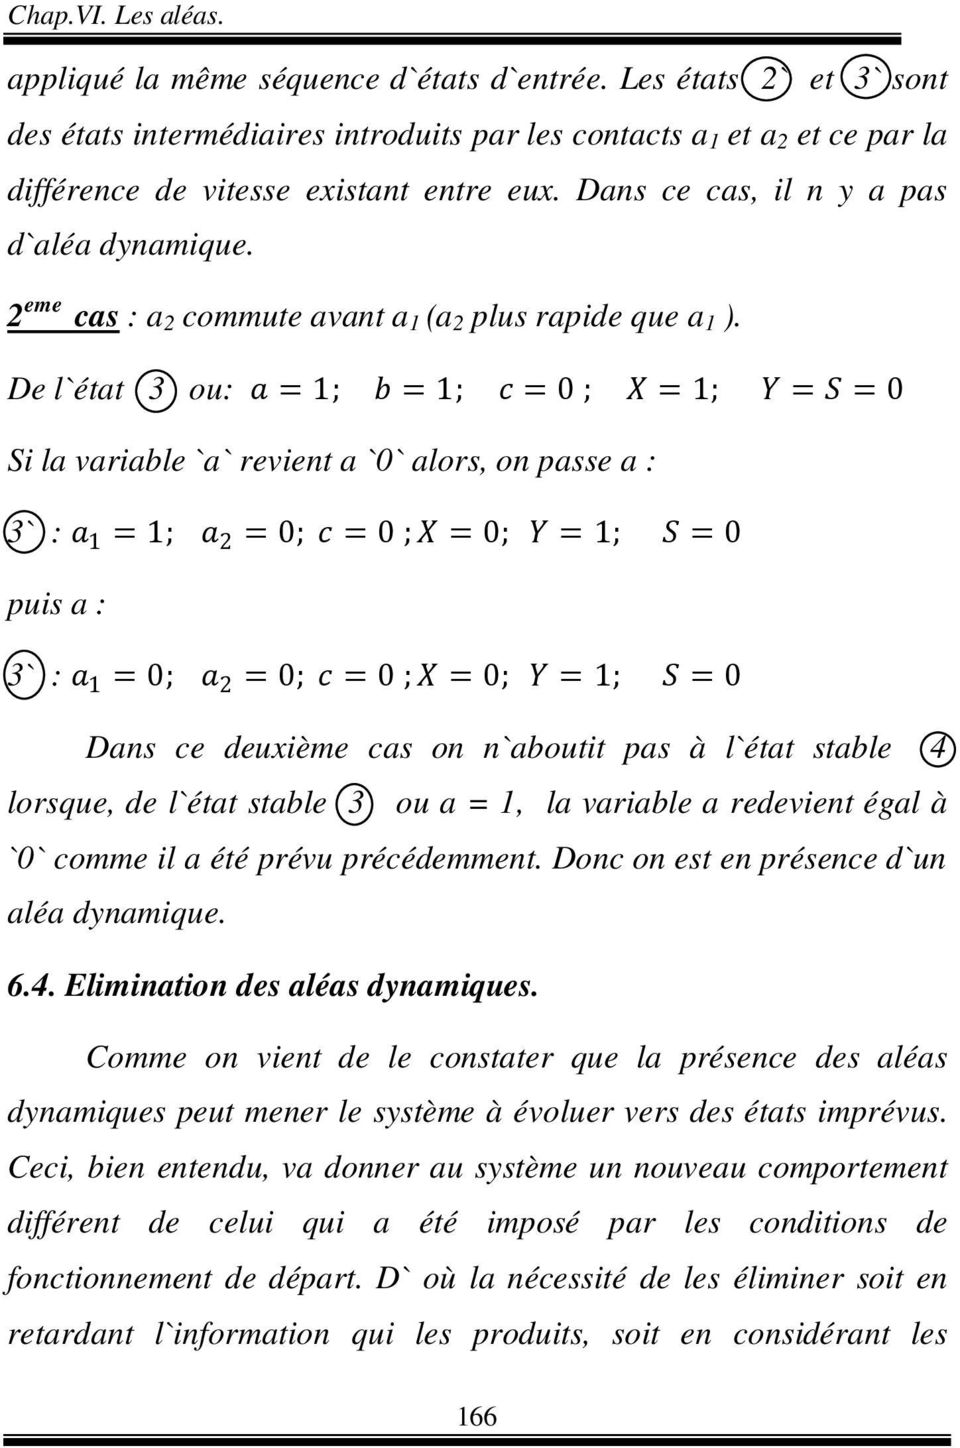 De l`état 3 ou: aa = 1; bb = 1; cc = 0 ; XX = 1; YY = SS = 0 Si la variable `a` revient a `0` alors, on passe a : 3` : aa 1 = 1; aa 2 = 0; cc = 0 ; XX = 0; YY = 1; SS = 0 puis a : 3` : aa 1 = 0; aa 2